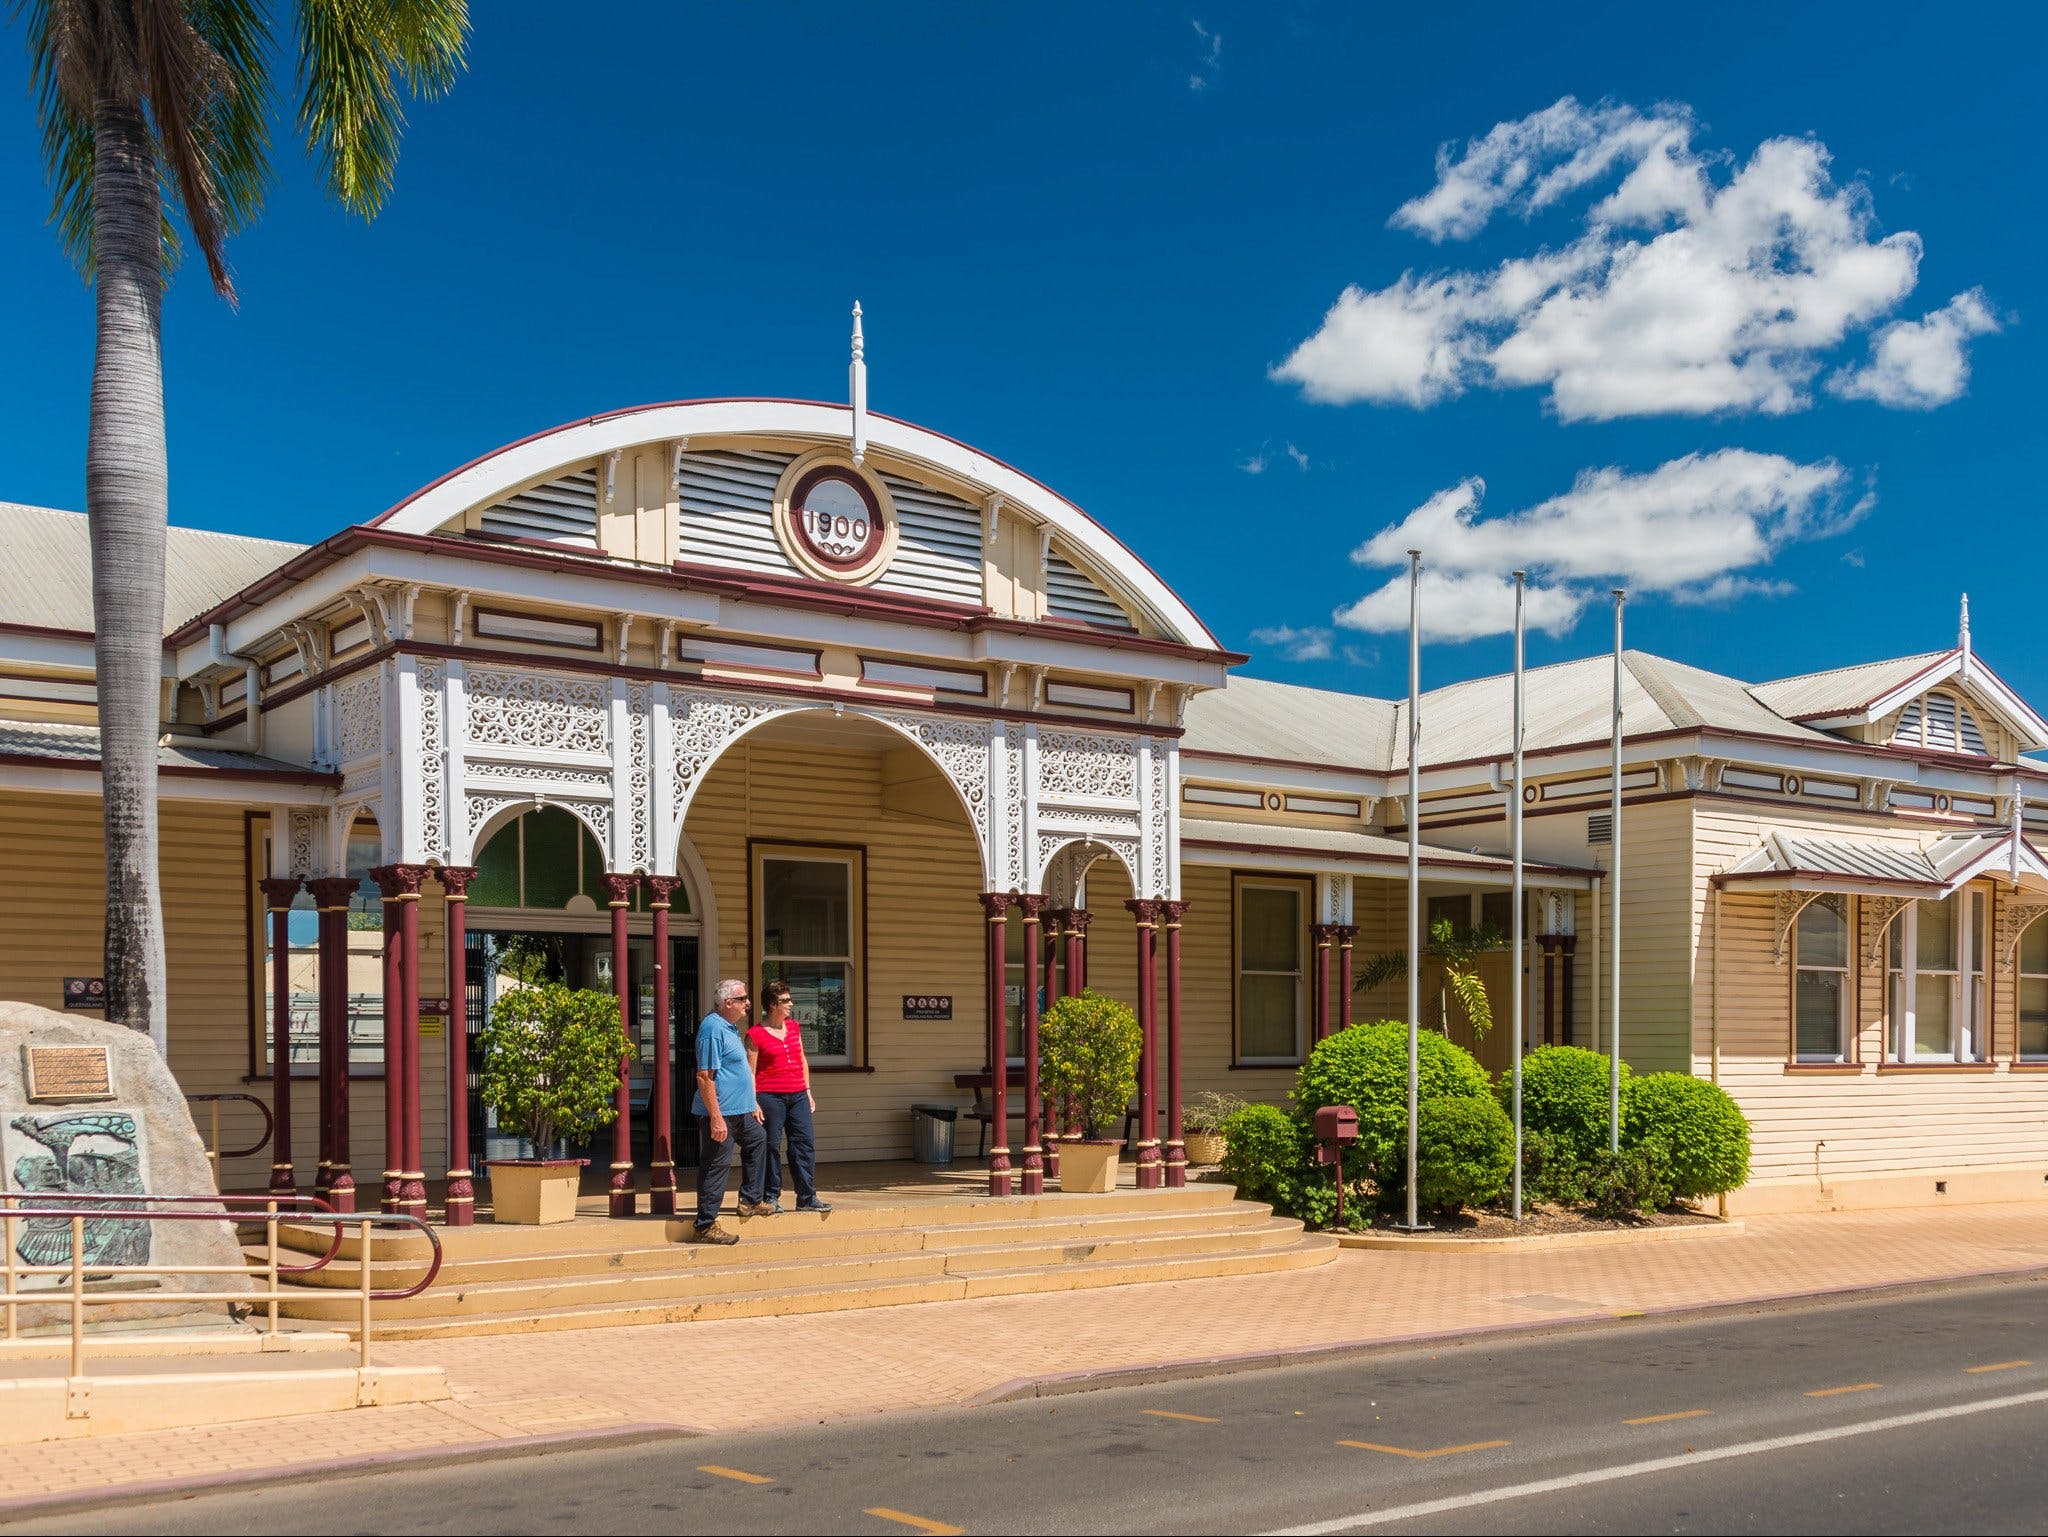 Emerald Historic Railway Station - Find Attractions